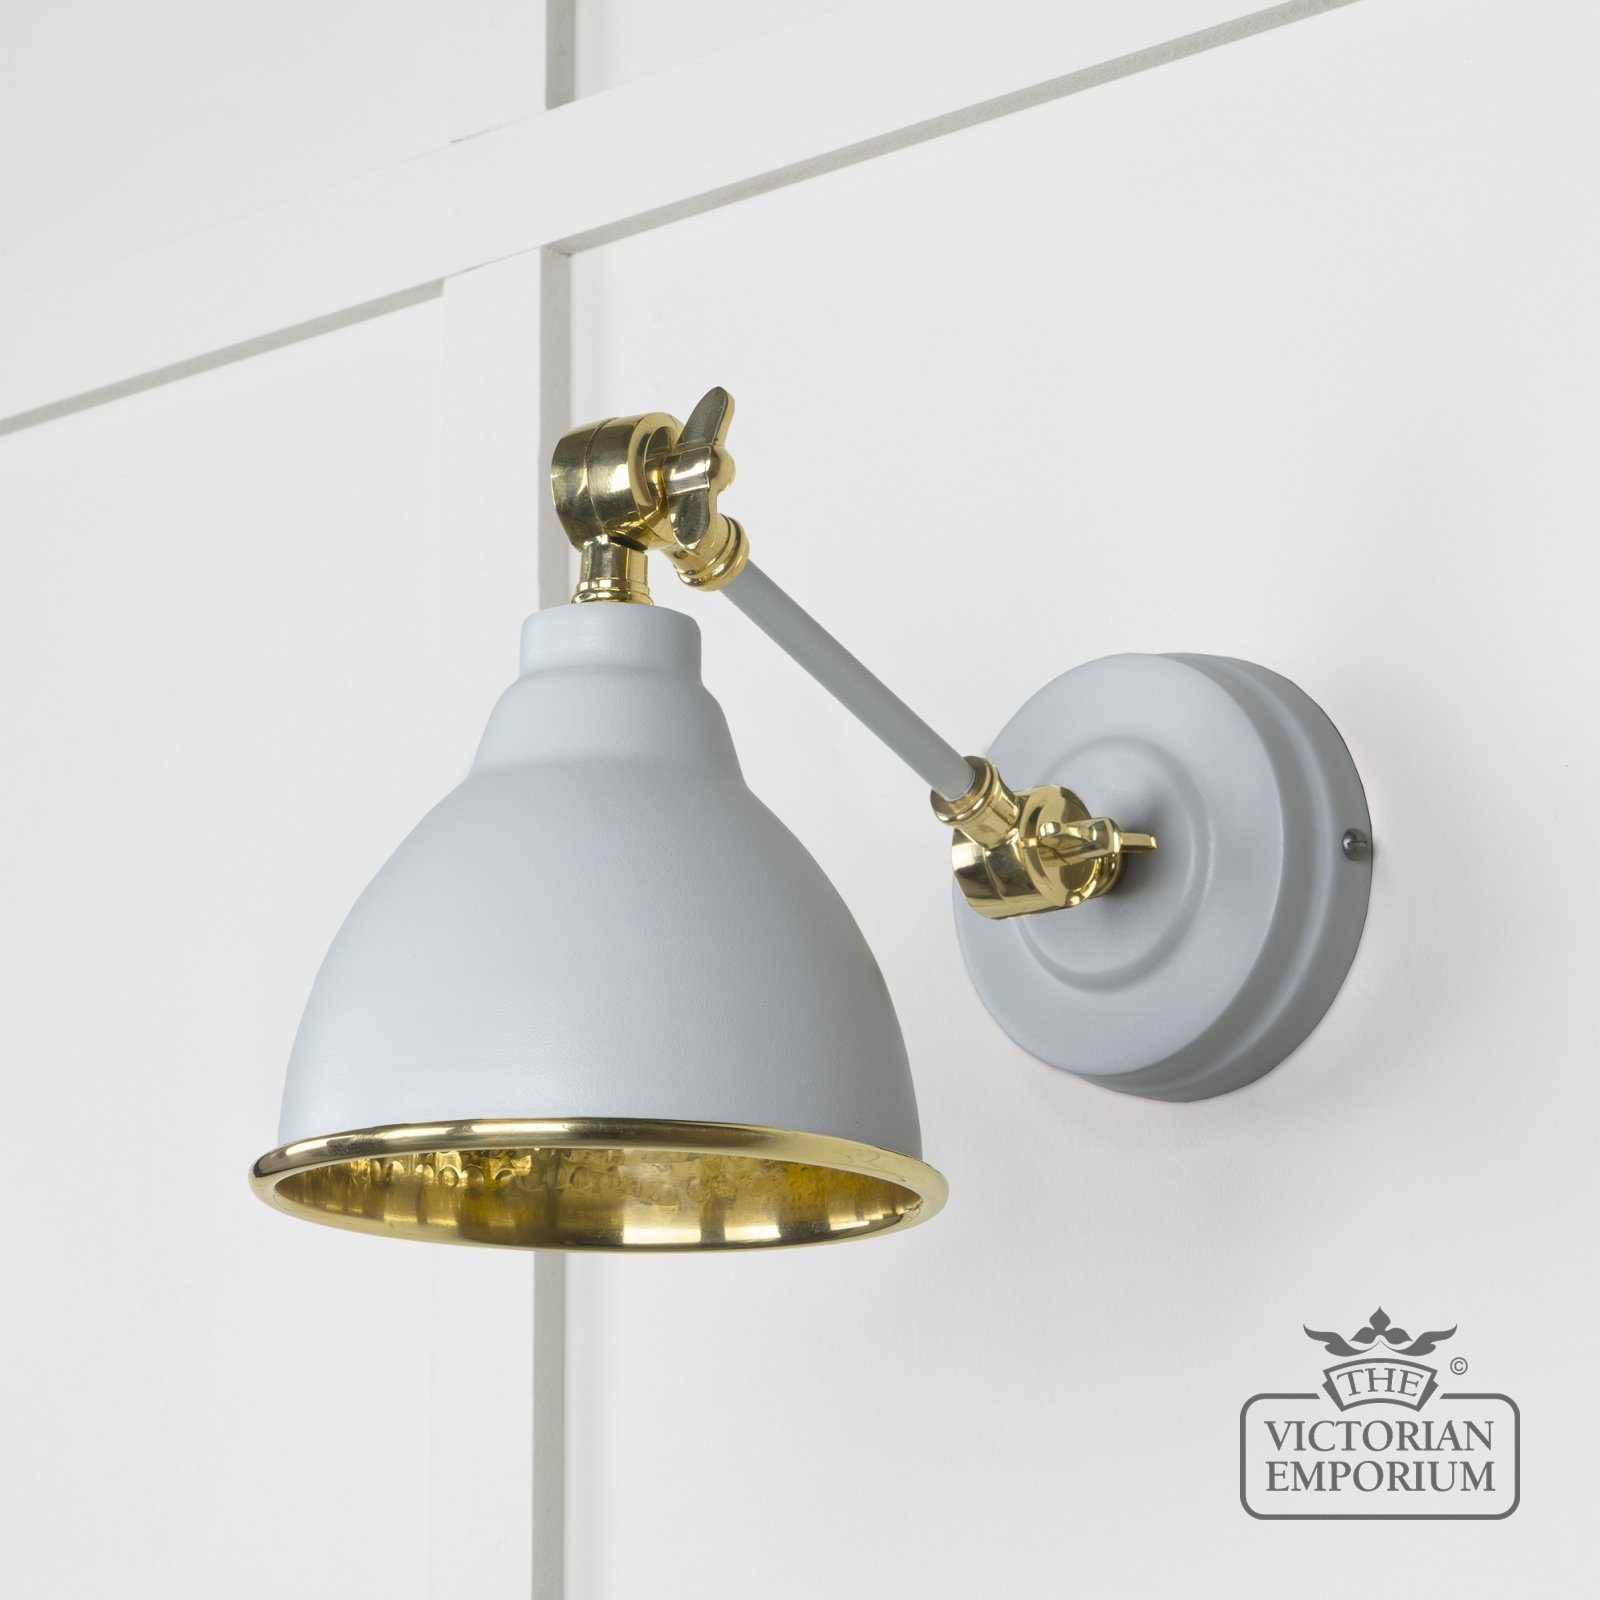 Brindle Wall Light in Hammered Brass with Birch Exterior